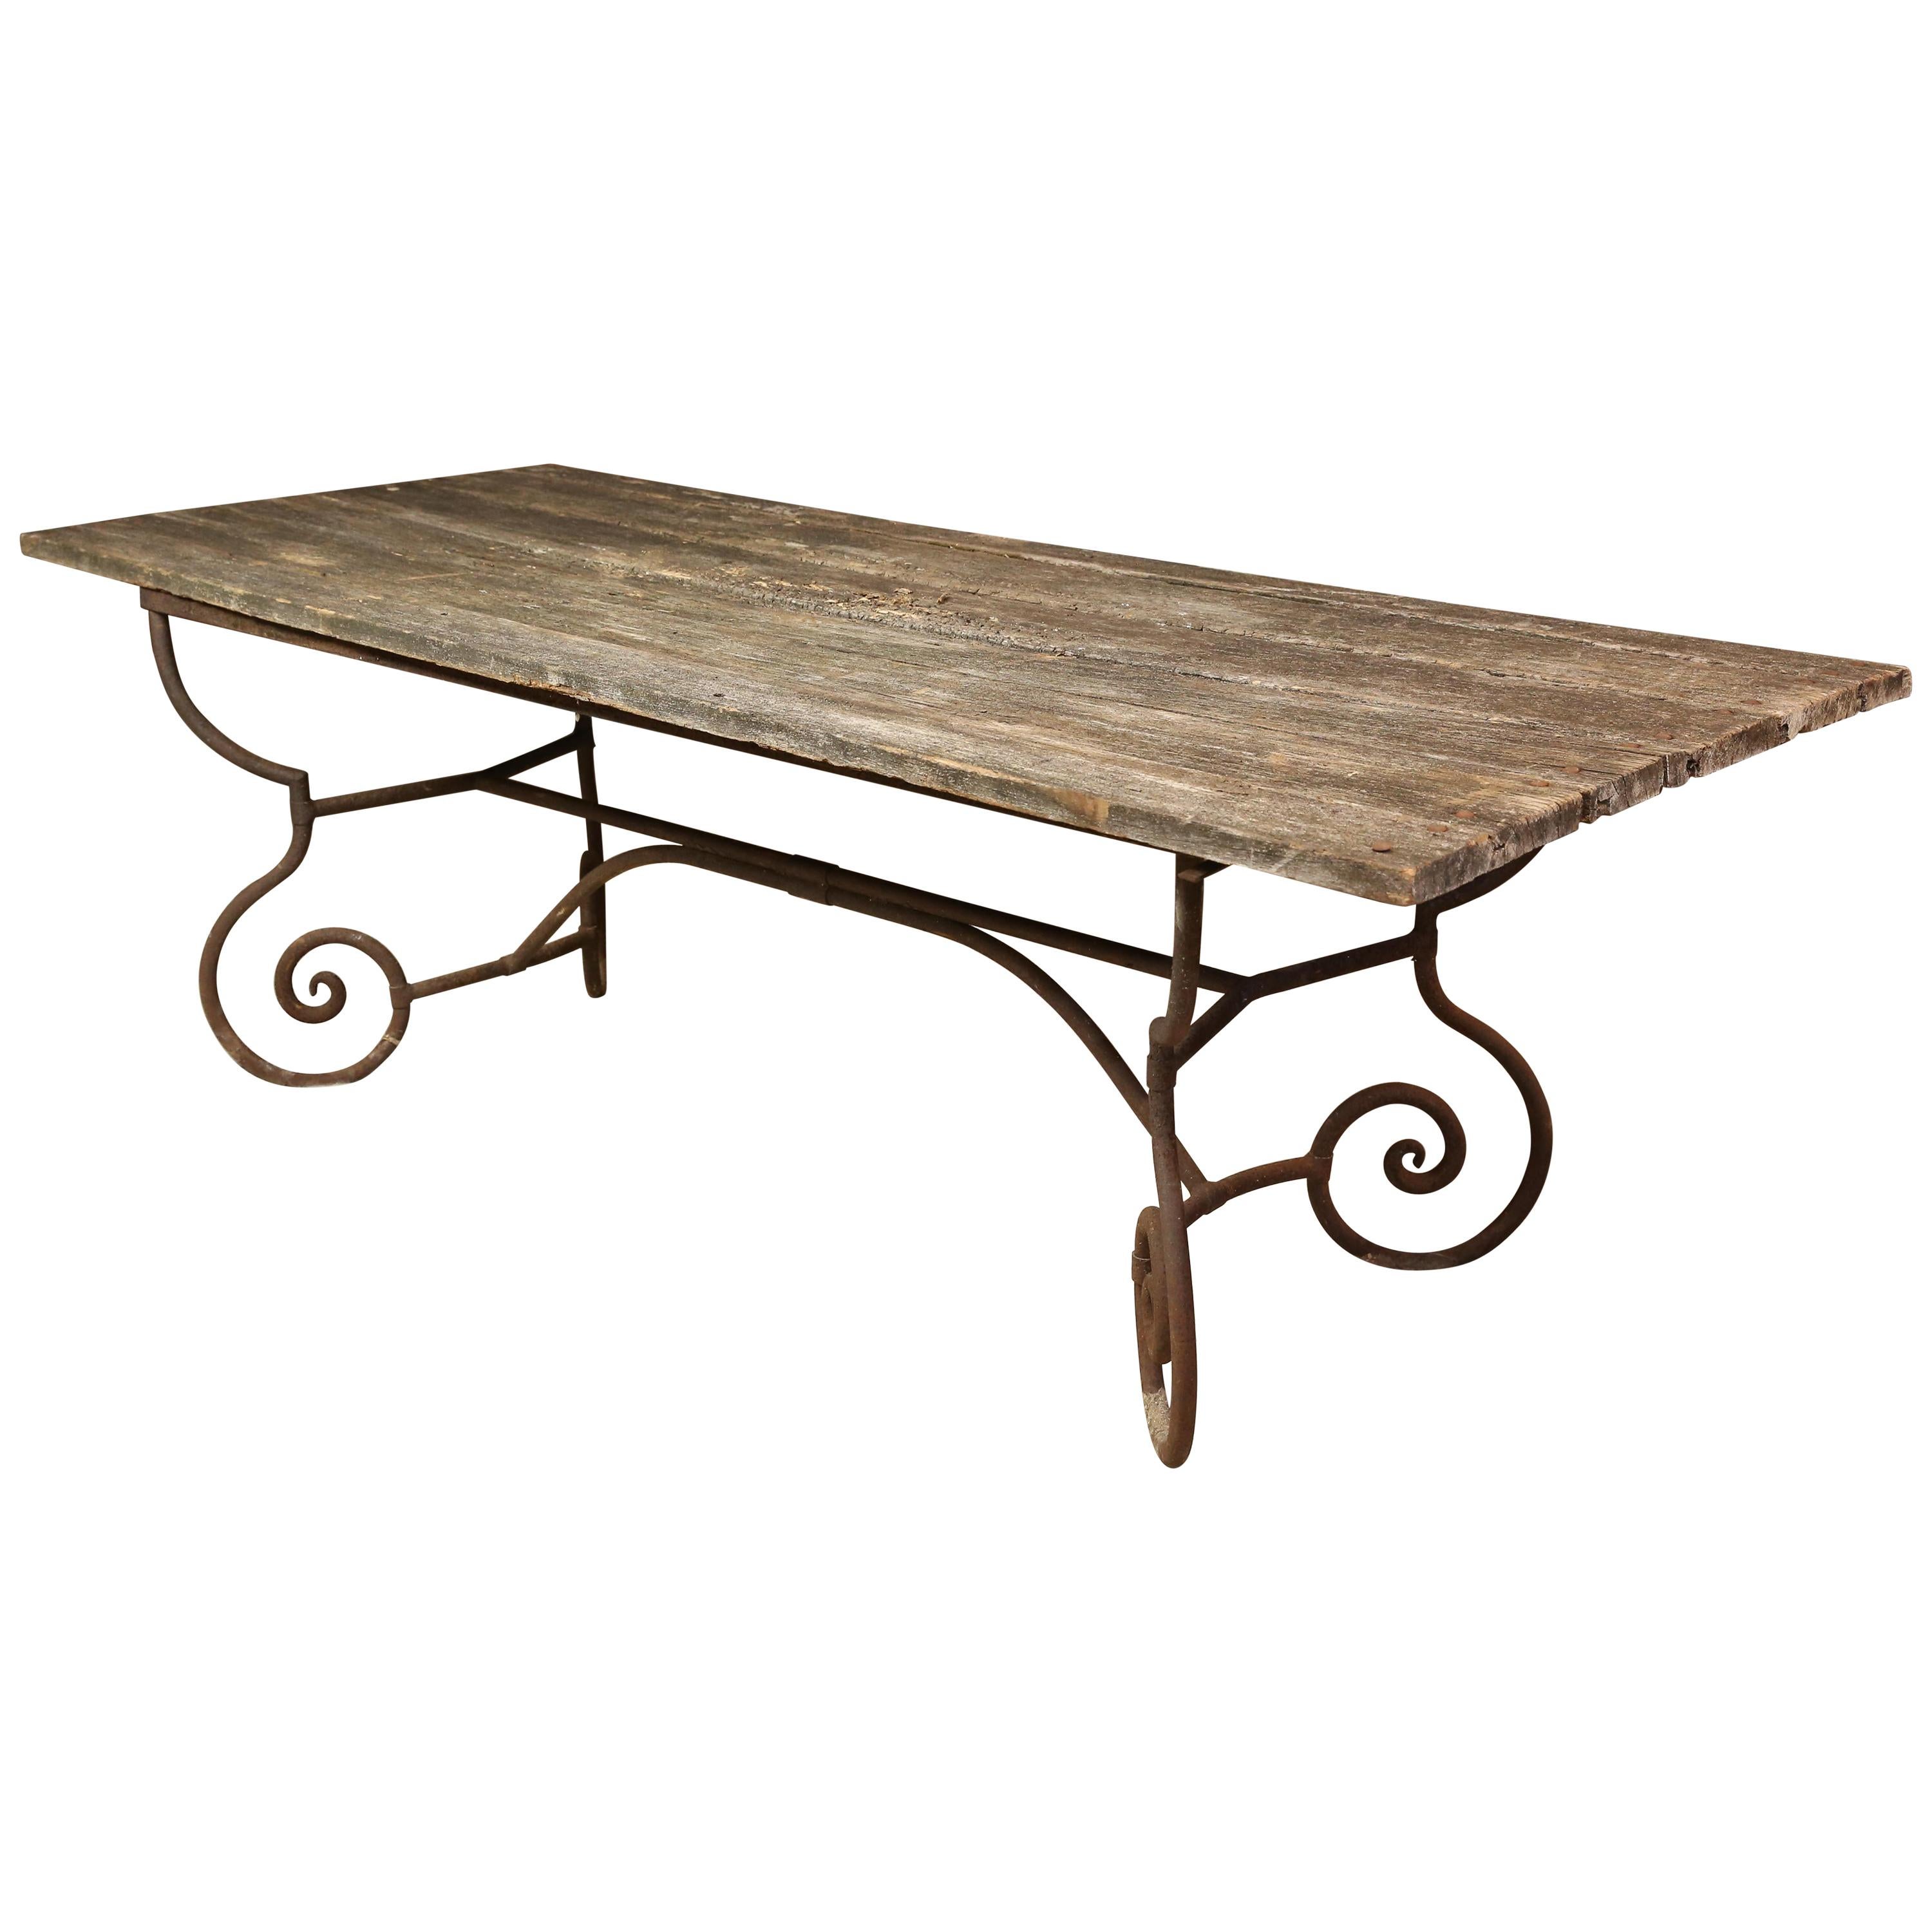 Antique French Iron Garden Table with Distressed Wood Top